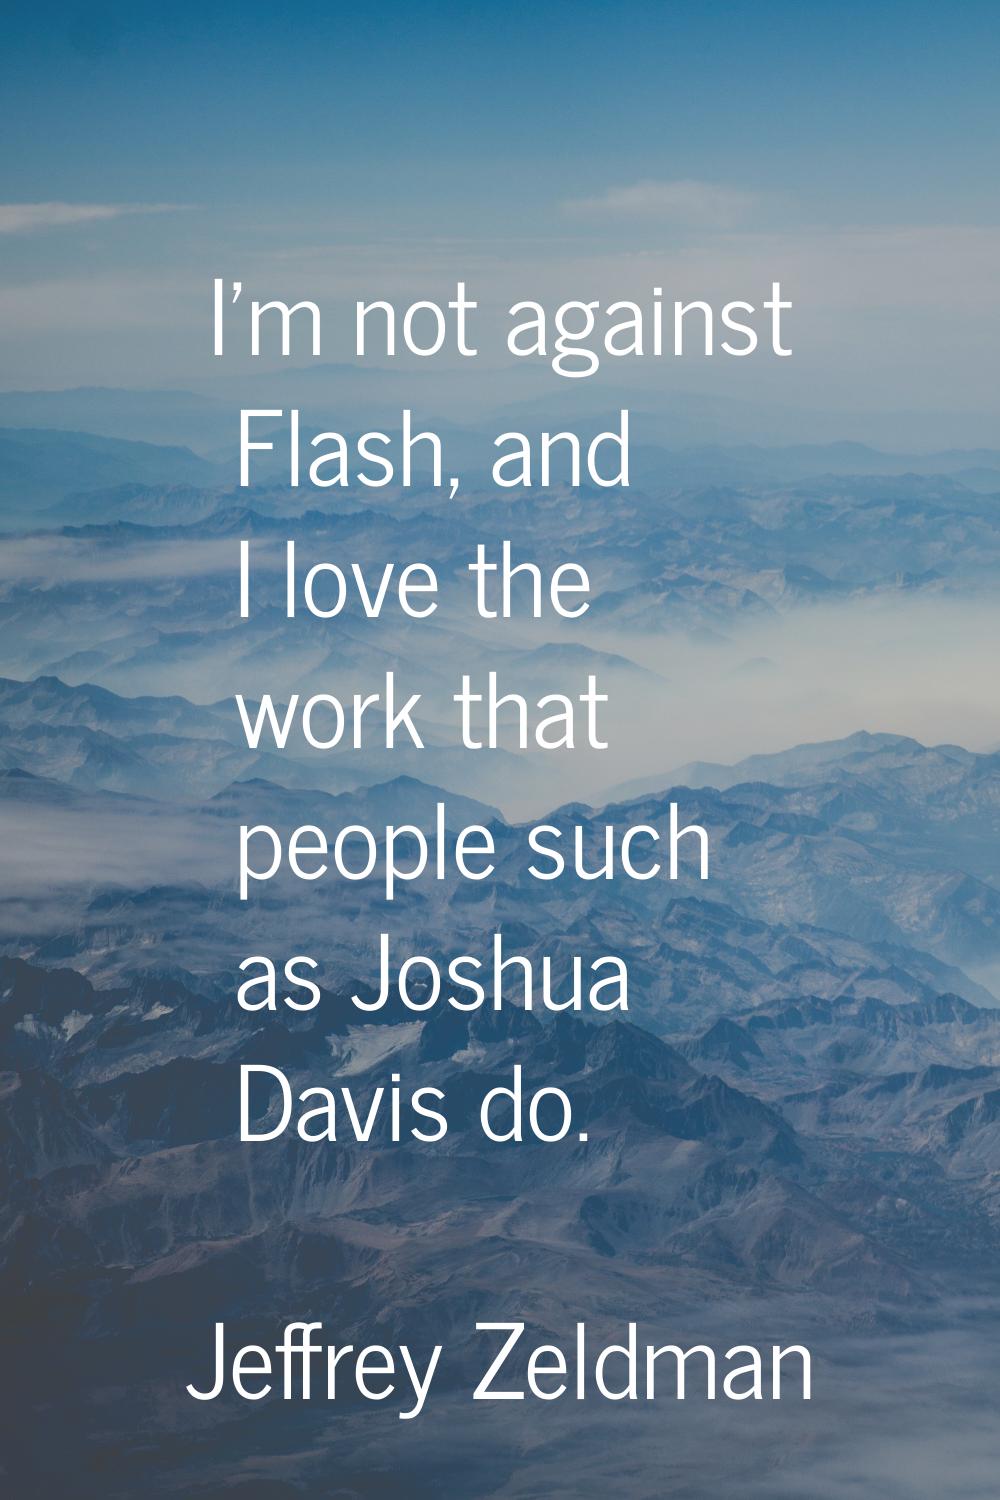 I'm not against Flash, and I love the work that people such as Joshua Davis do.